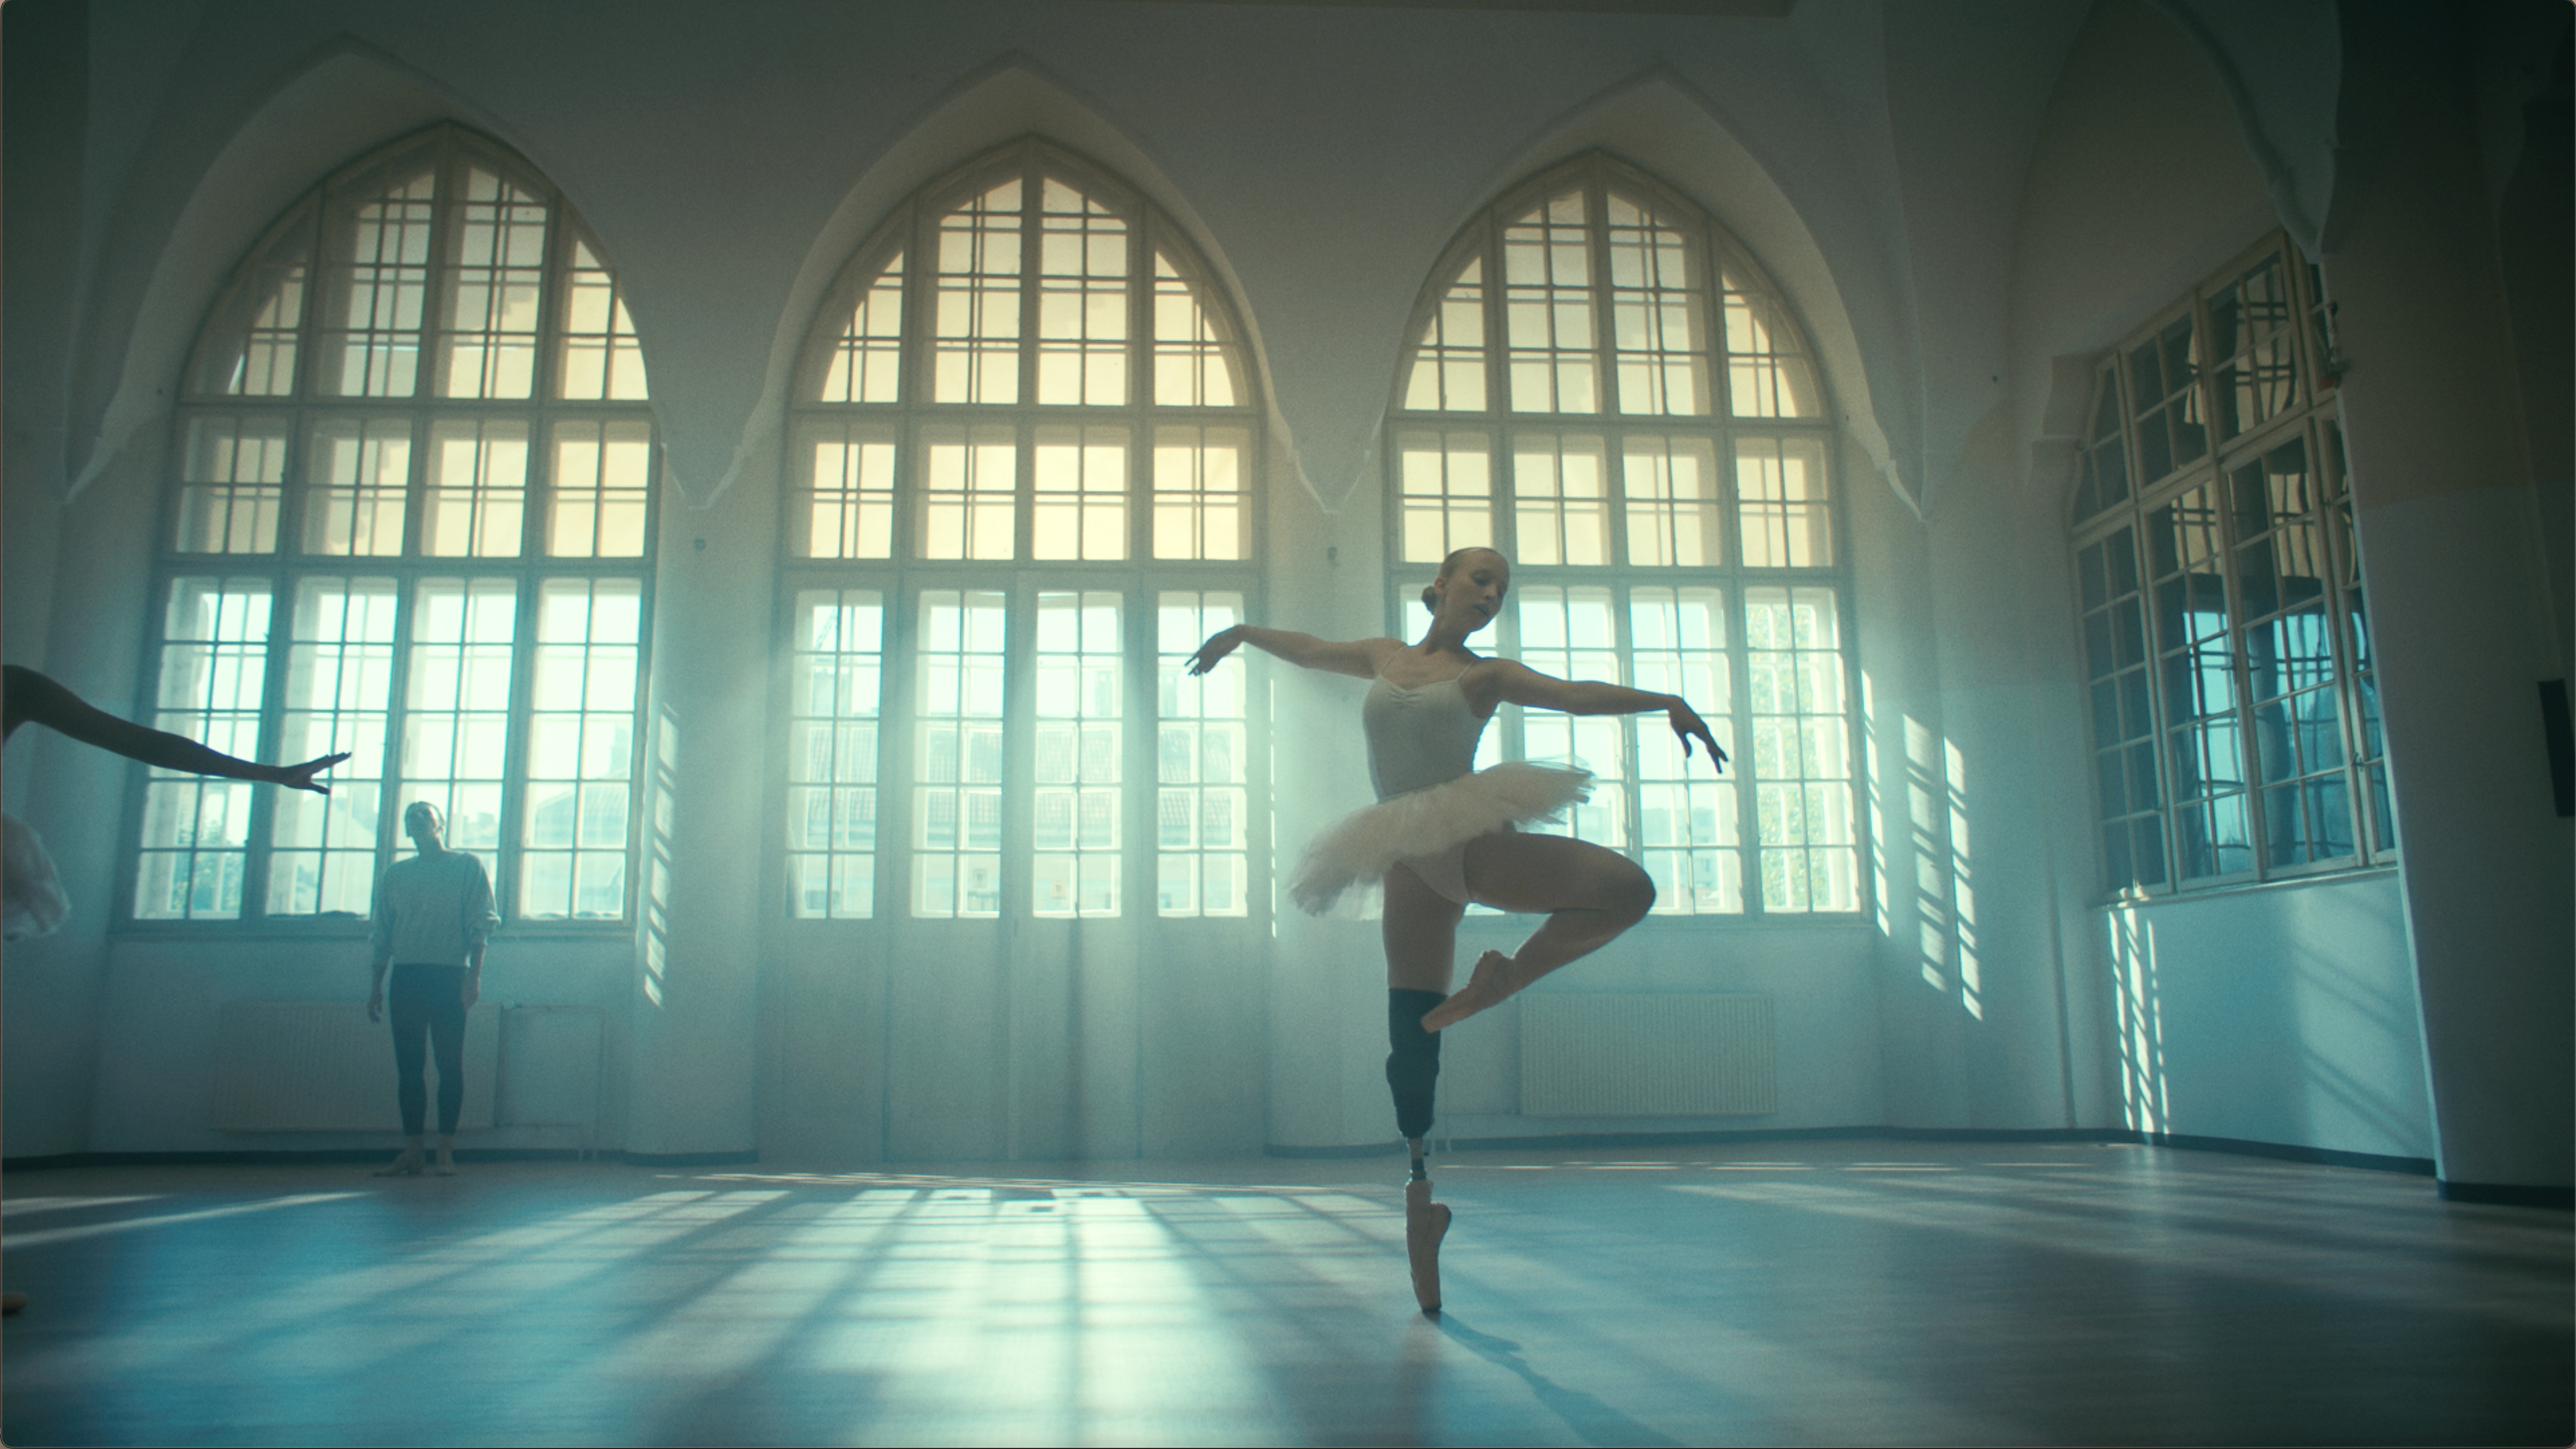 A ballerina with a prosthetic leg is frozen in pose in a loft studio with rays of sunlight shining through large windows behind her.